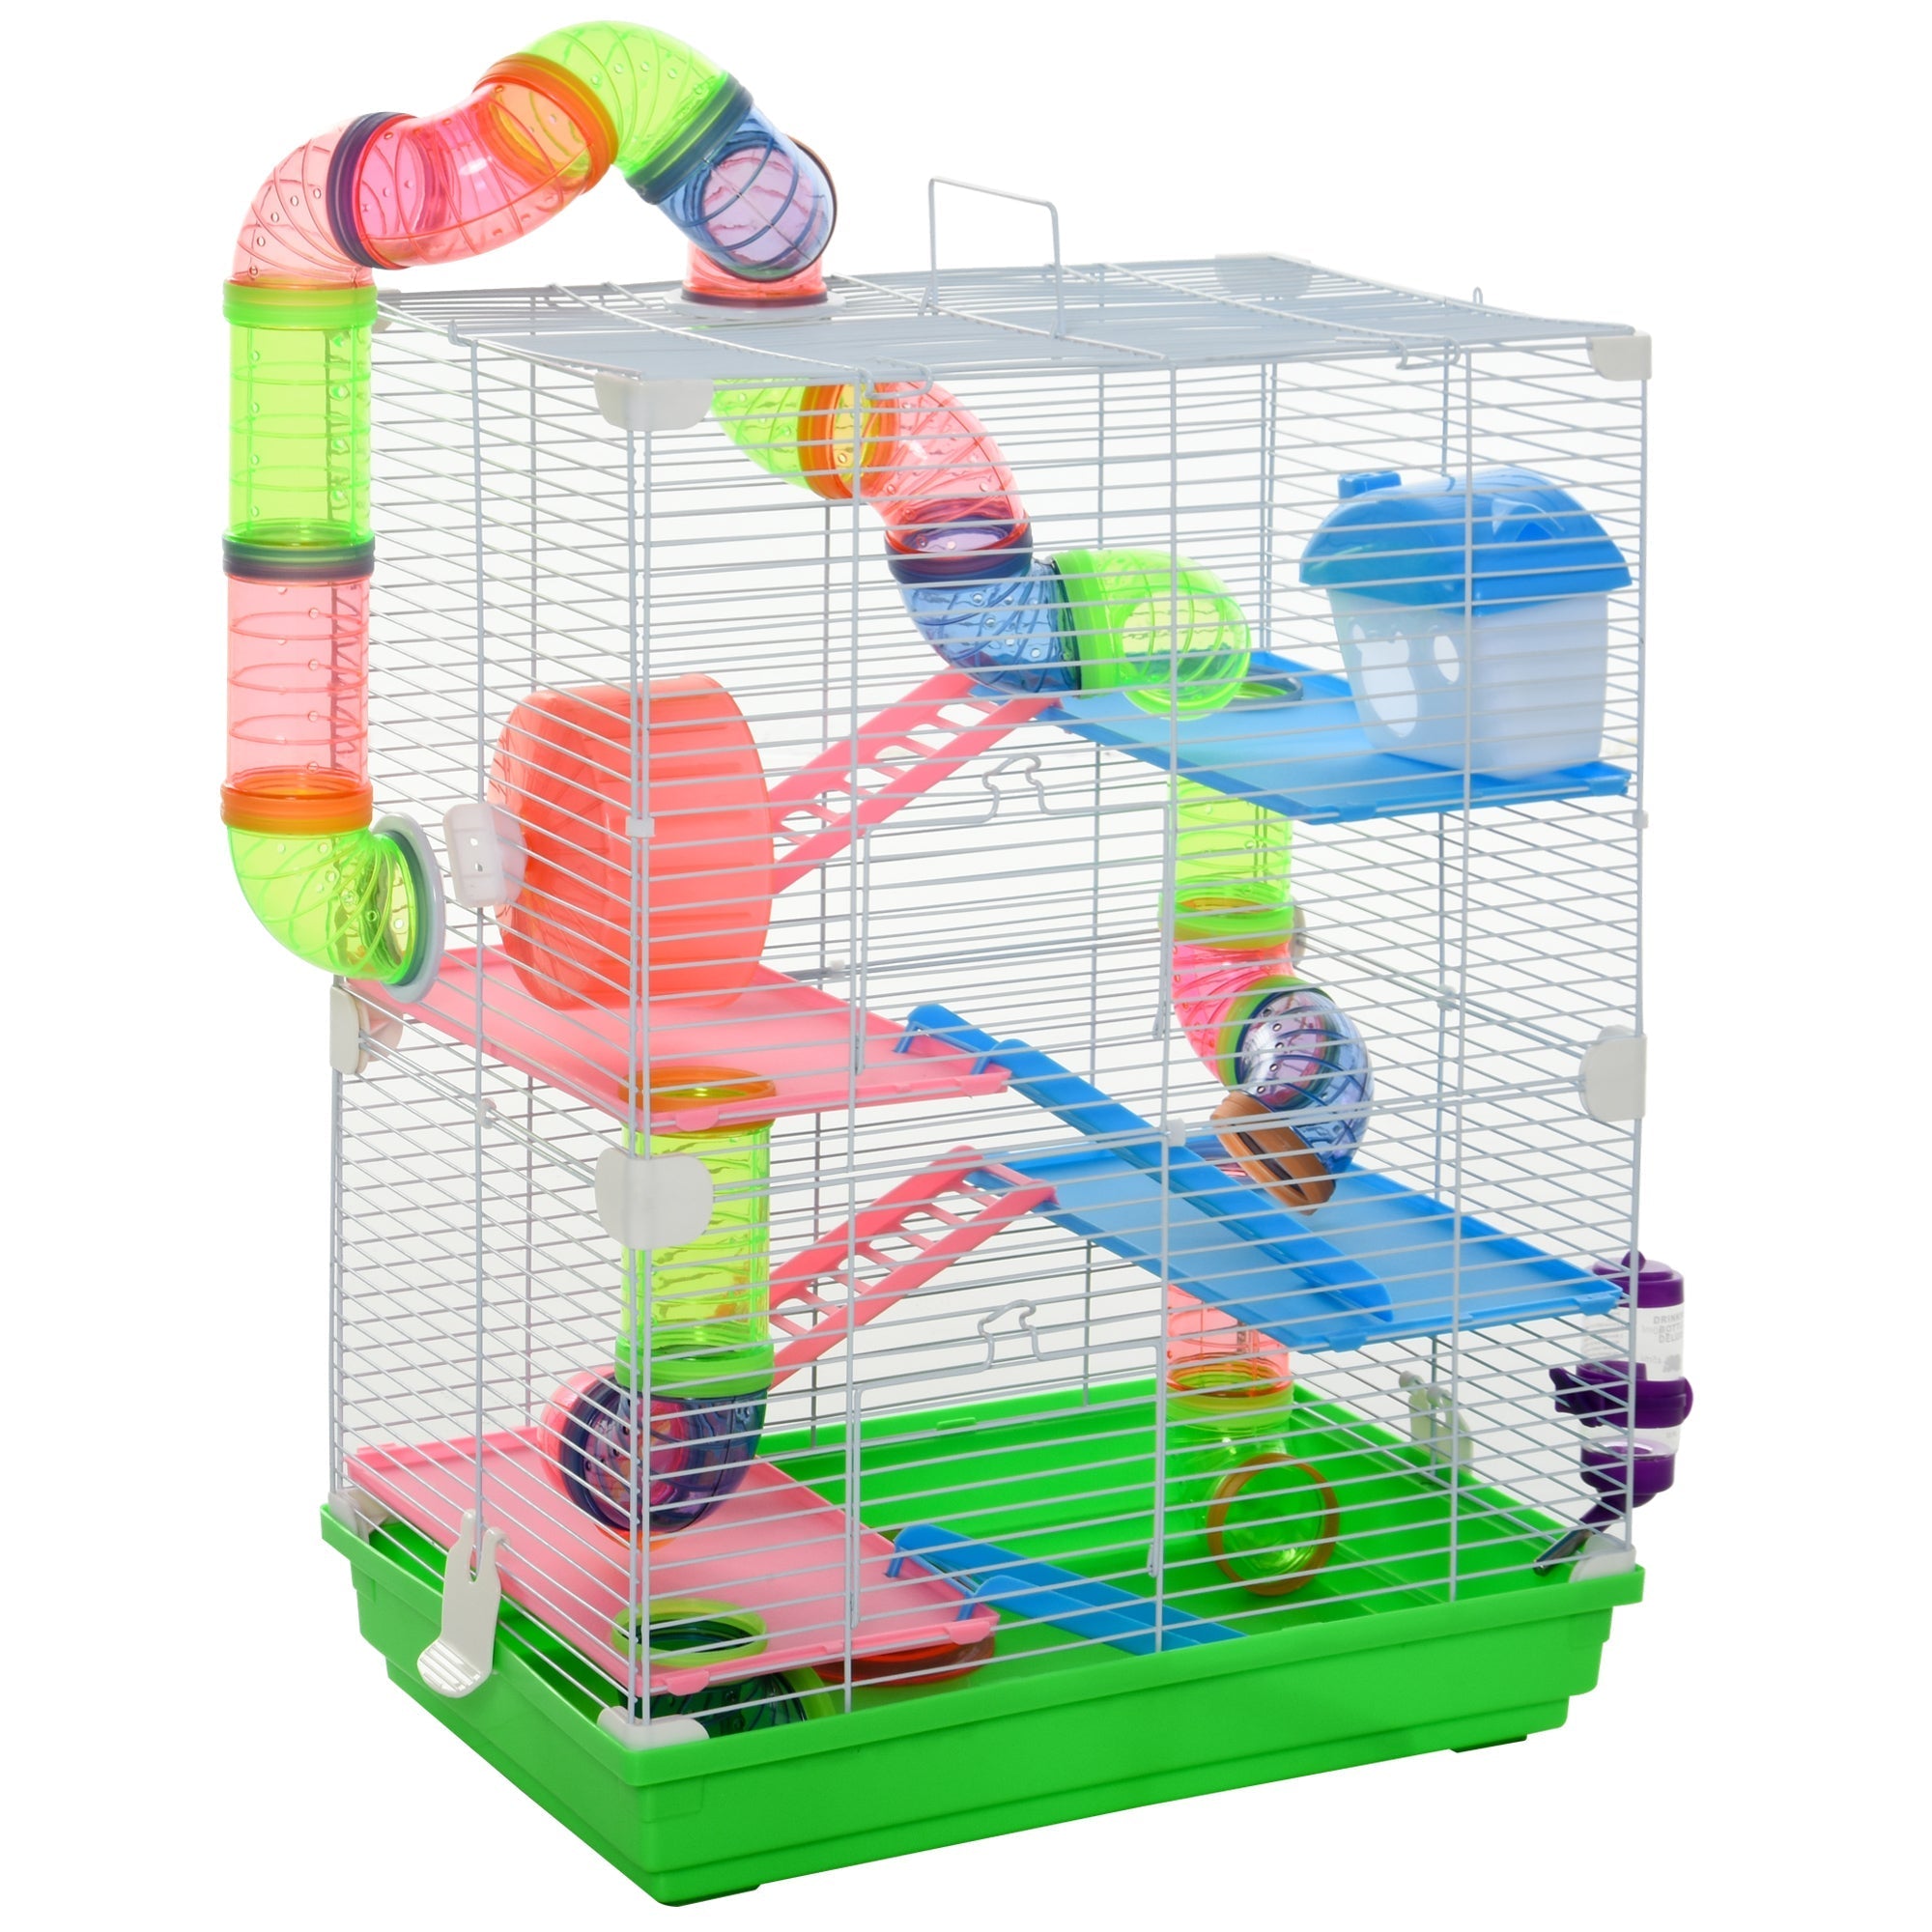 5-Tier Hamster Cage with Tunnel & Wheel - Ideal for Dwarf Mice, PawHut,